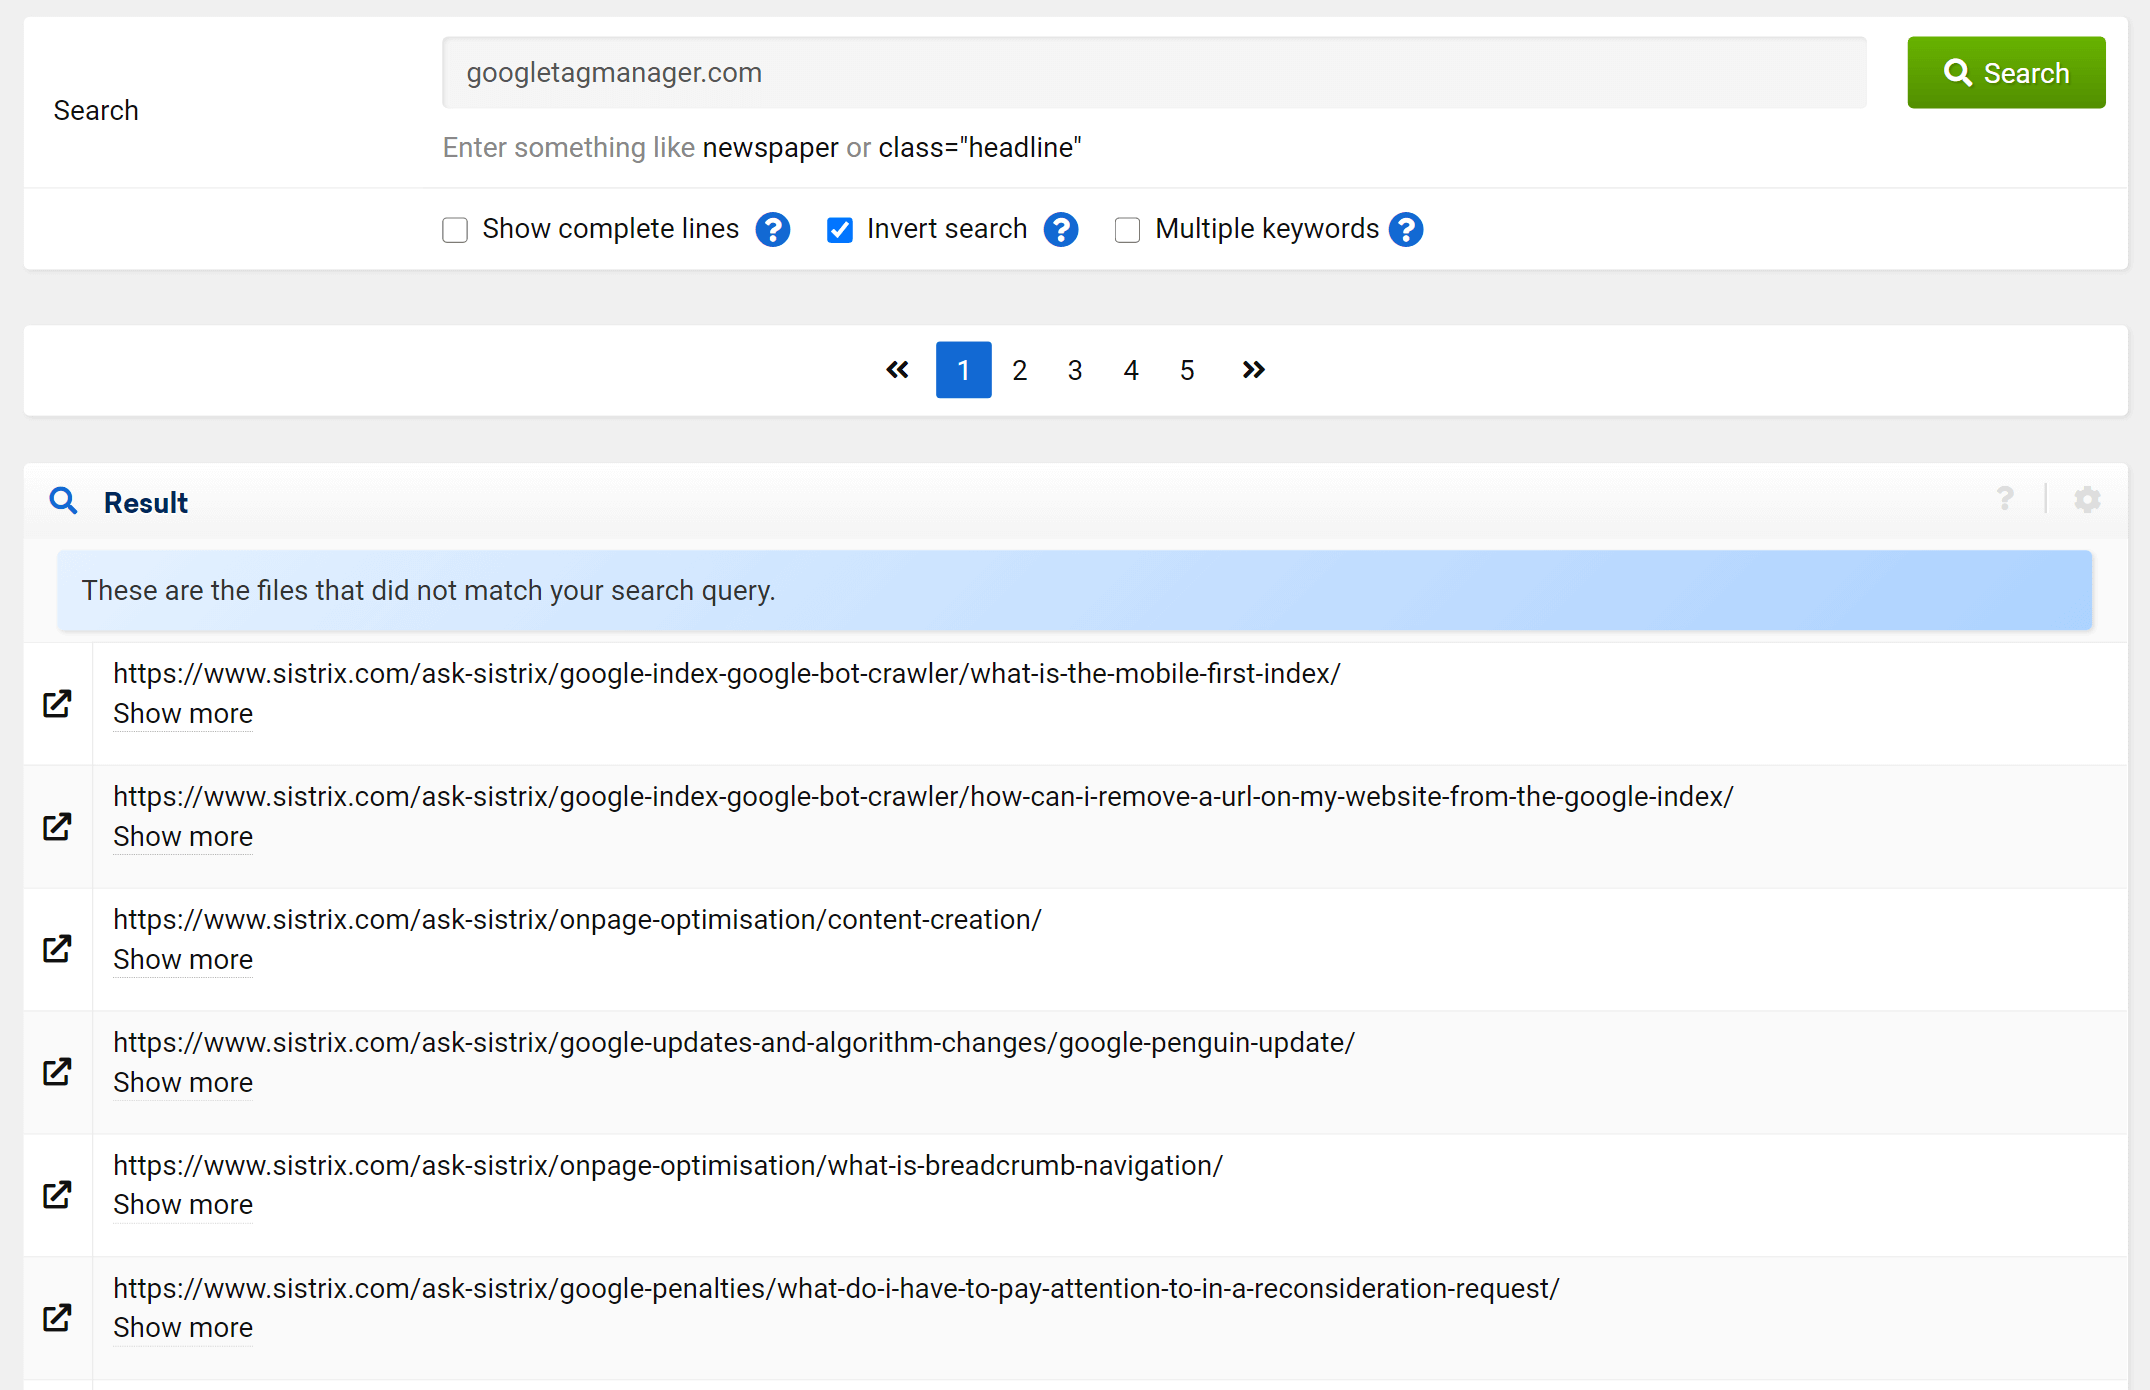 SISTRIX Optimizer Code Search with inverted search option for the phrase googletagmanager.com